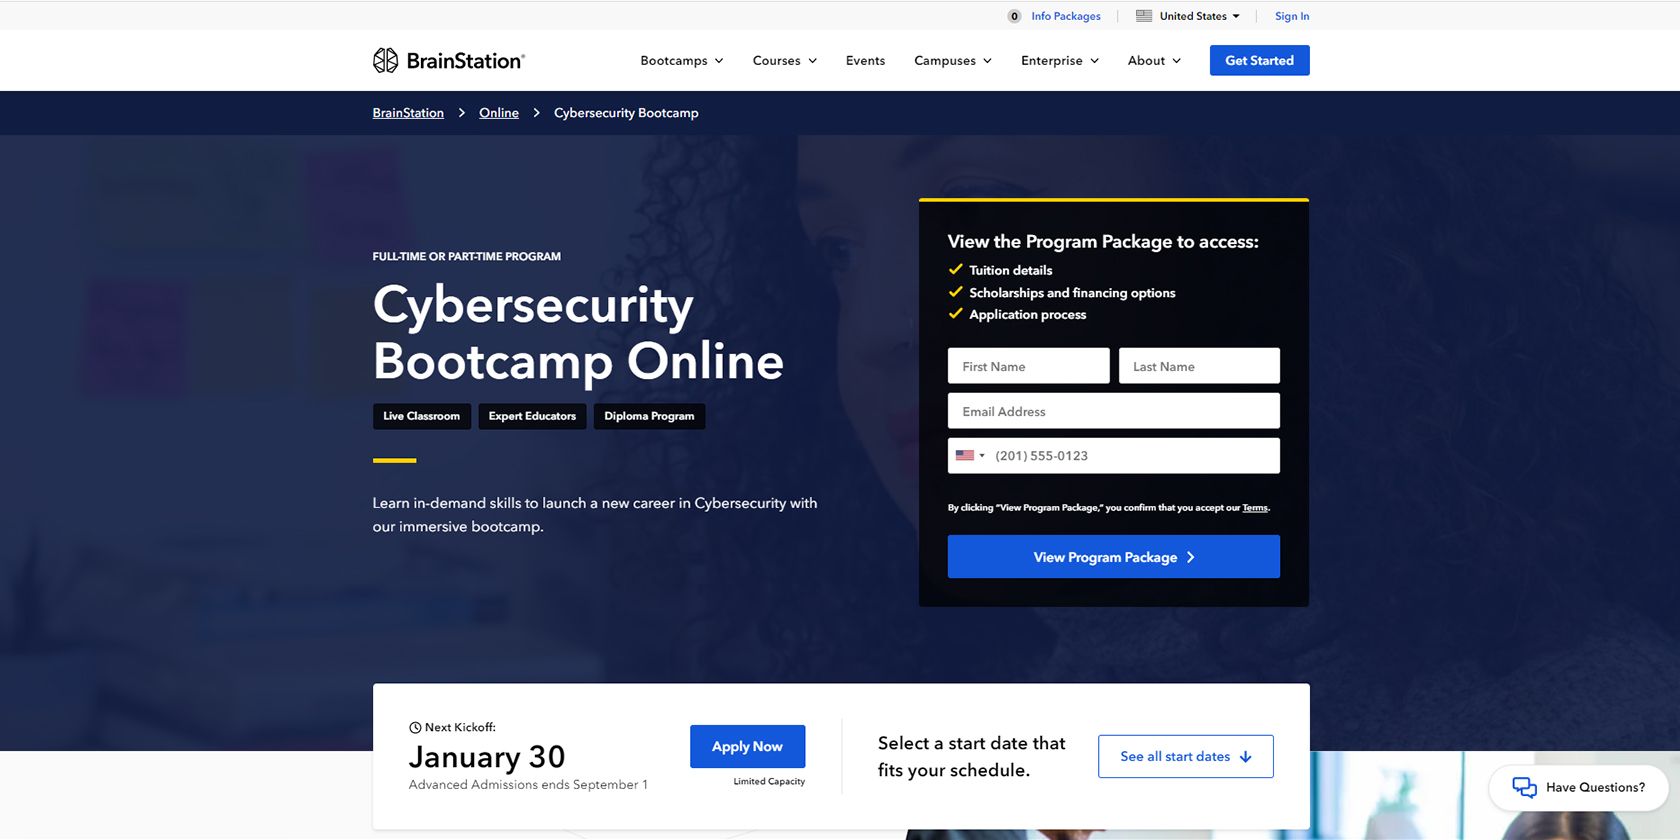 BrainStation's Cybersecurity Bootcamp